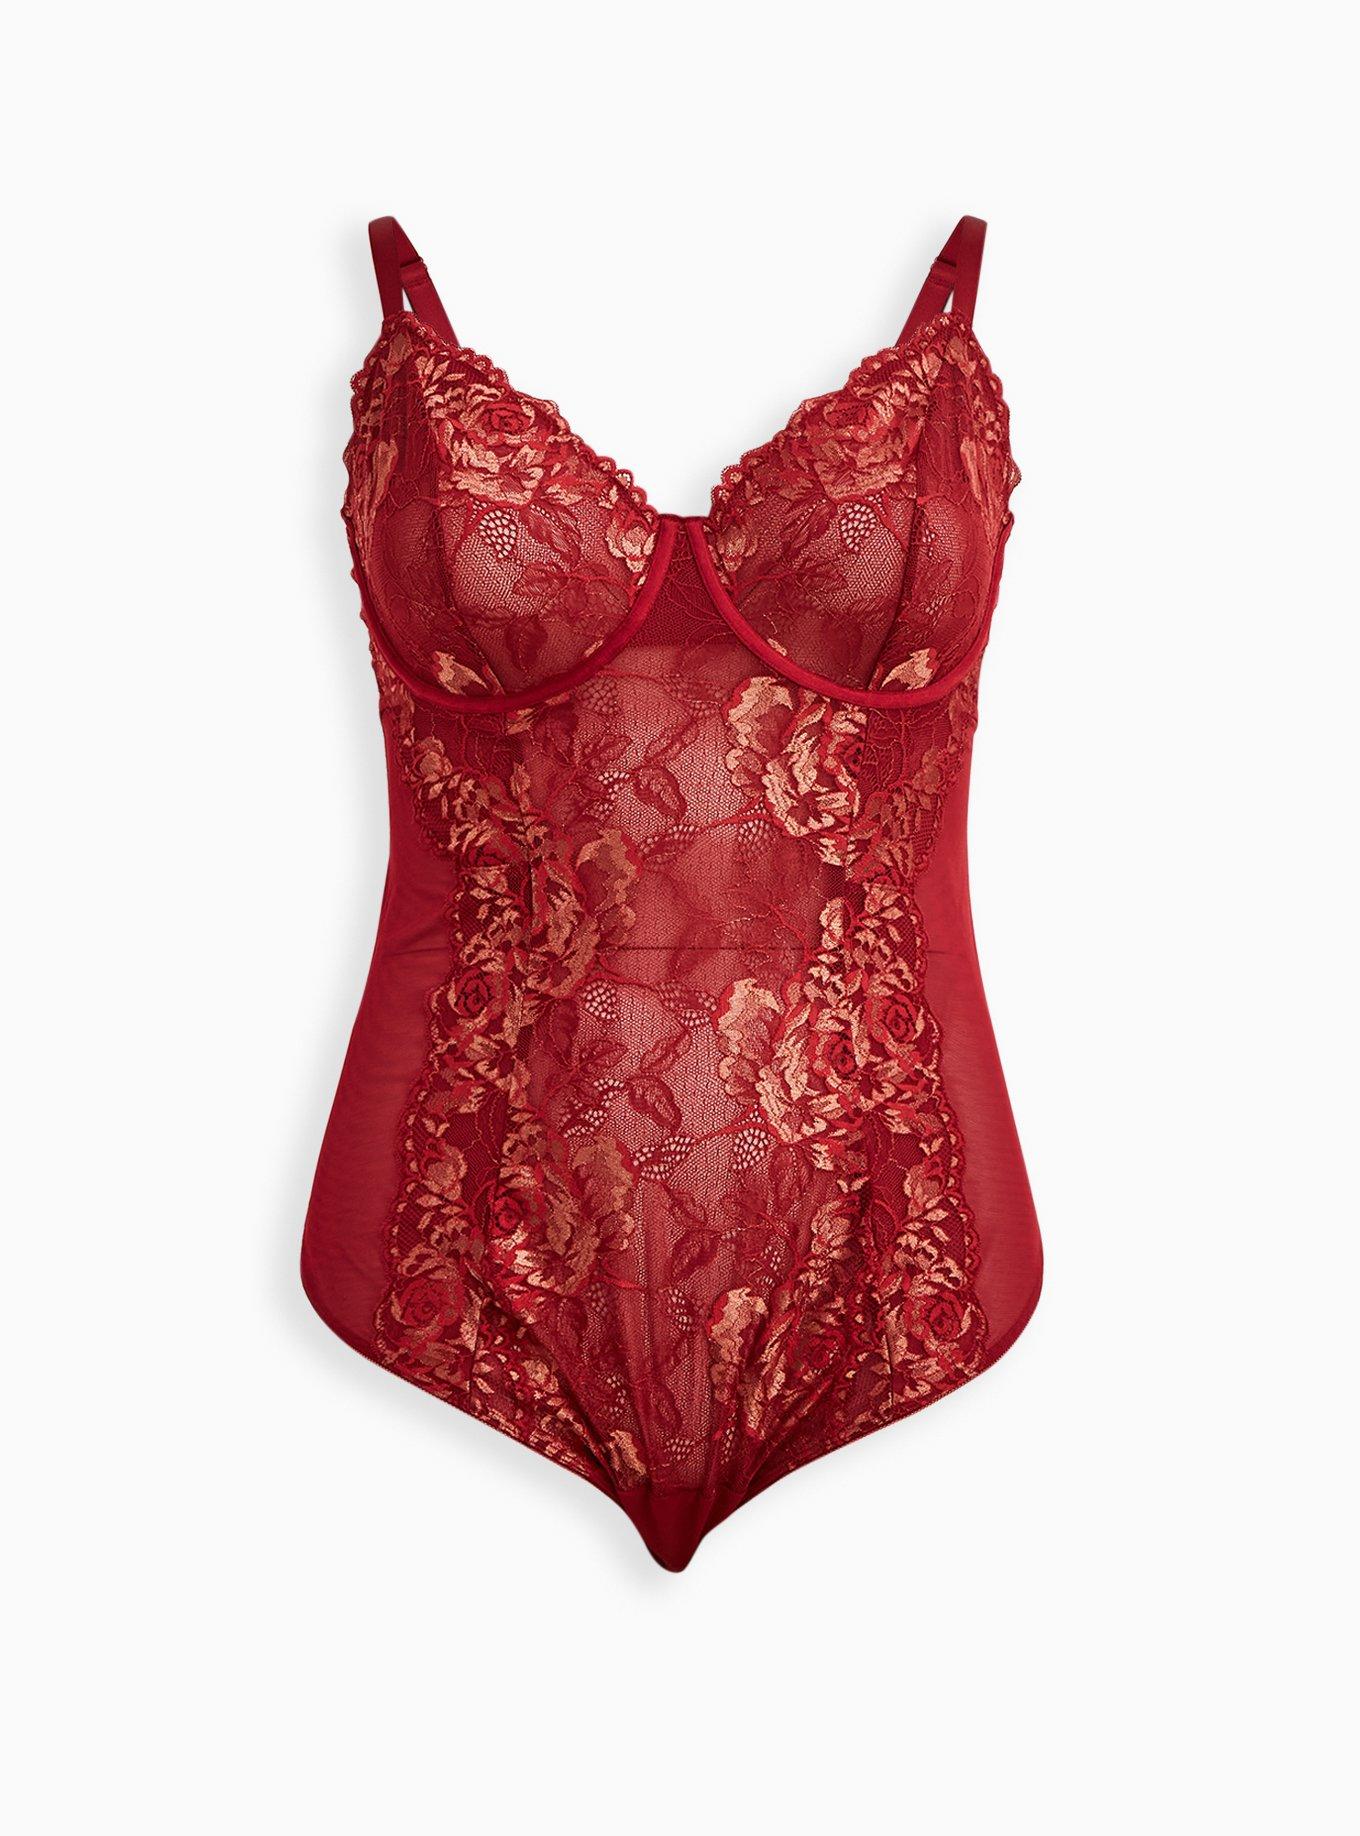 Plus Size - Underwire Thong Bodysuit - Lace Red & Gold - Torrid